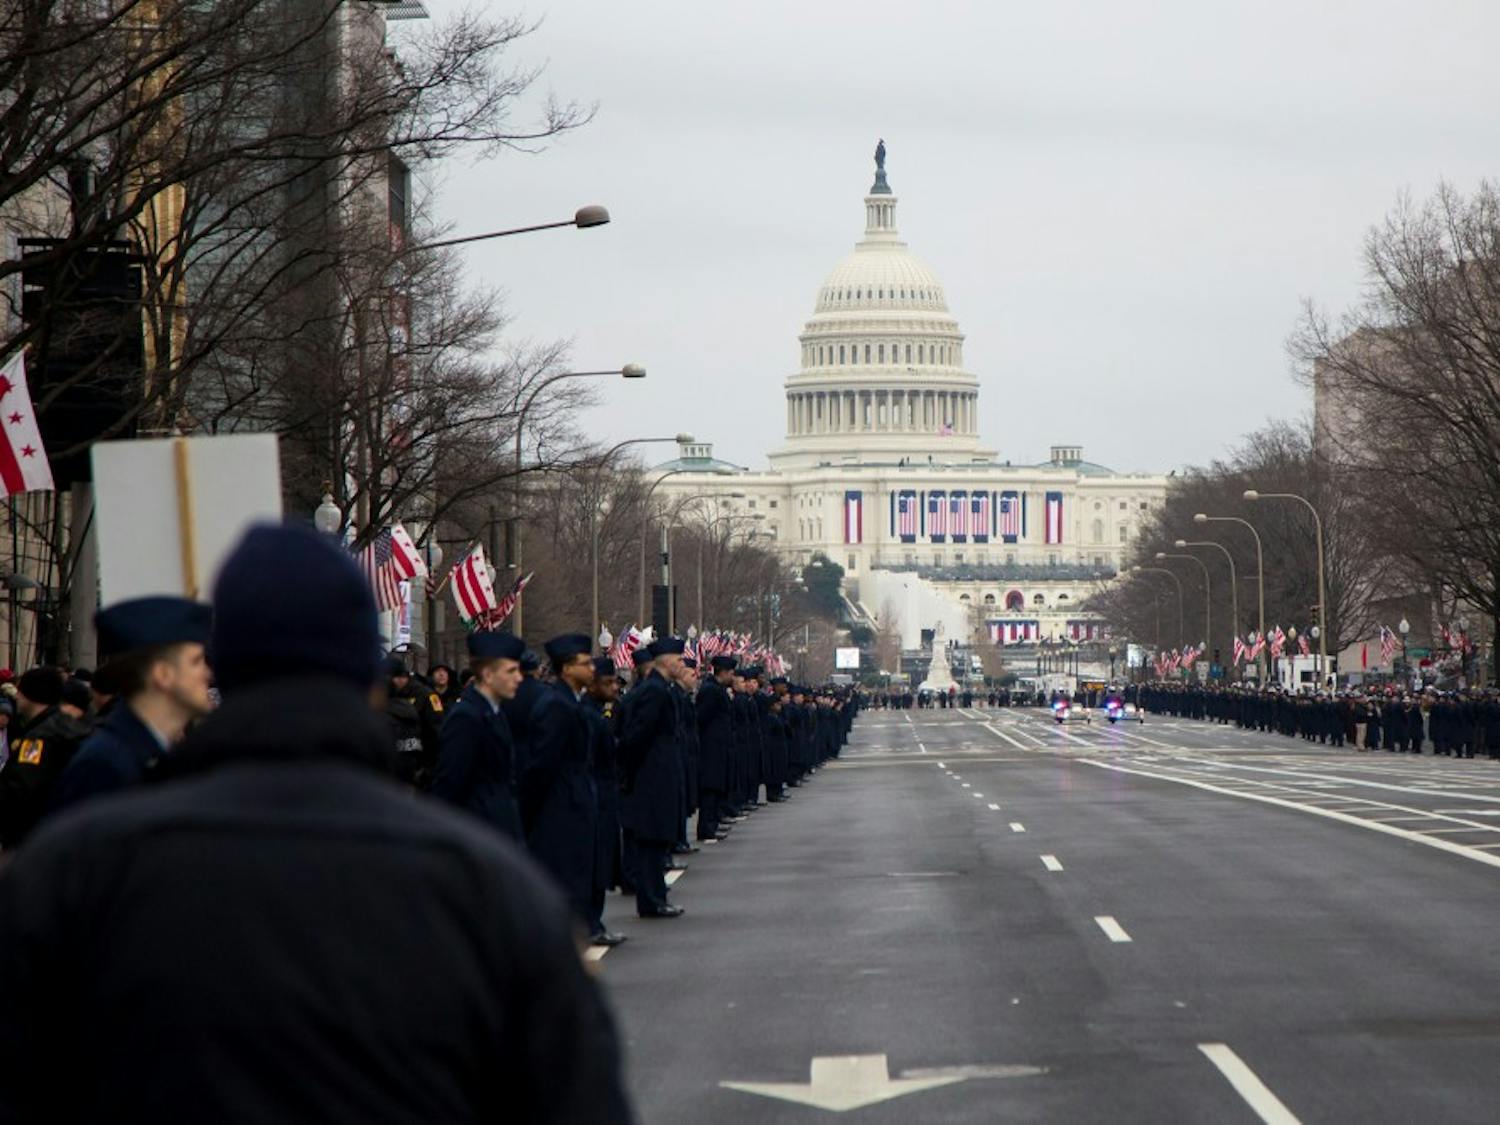 Consititution Avenue is cleared for the parade following Donald Trump's inauguration on Jan 21, 2017. The Capital Building is adorned with American flags.